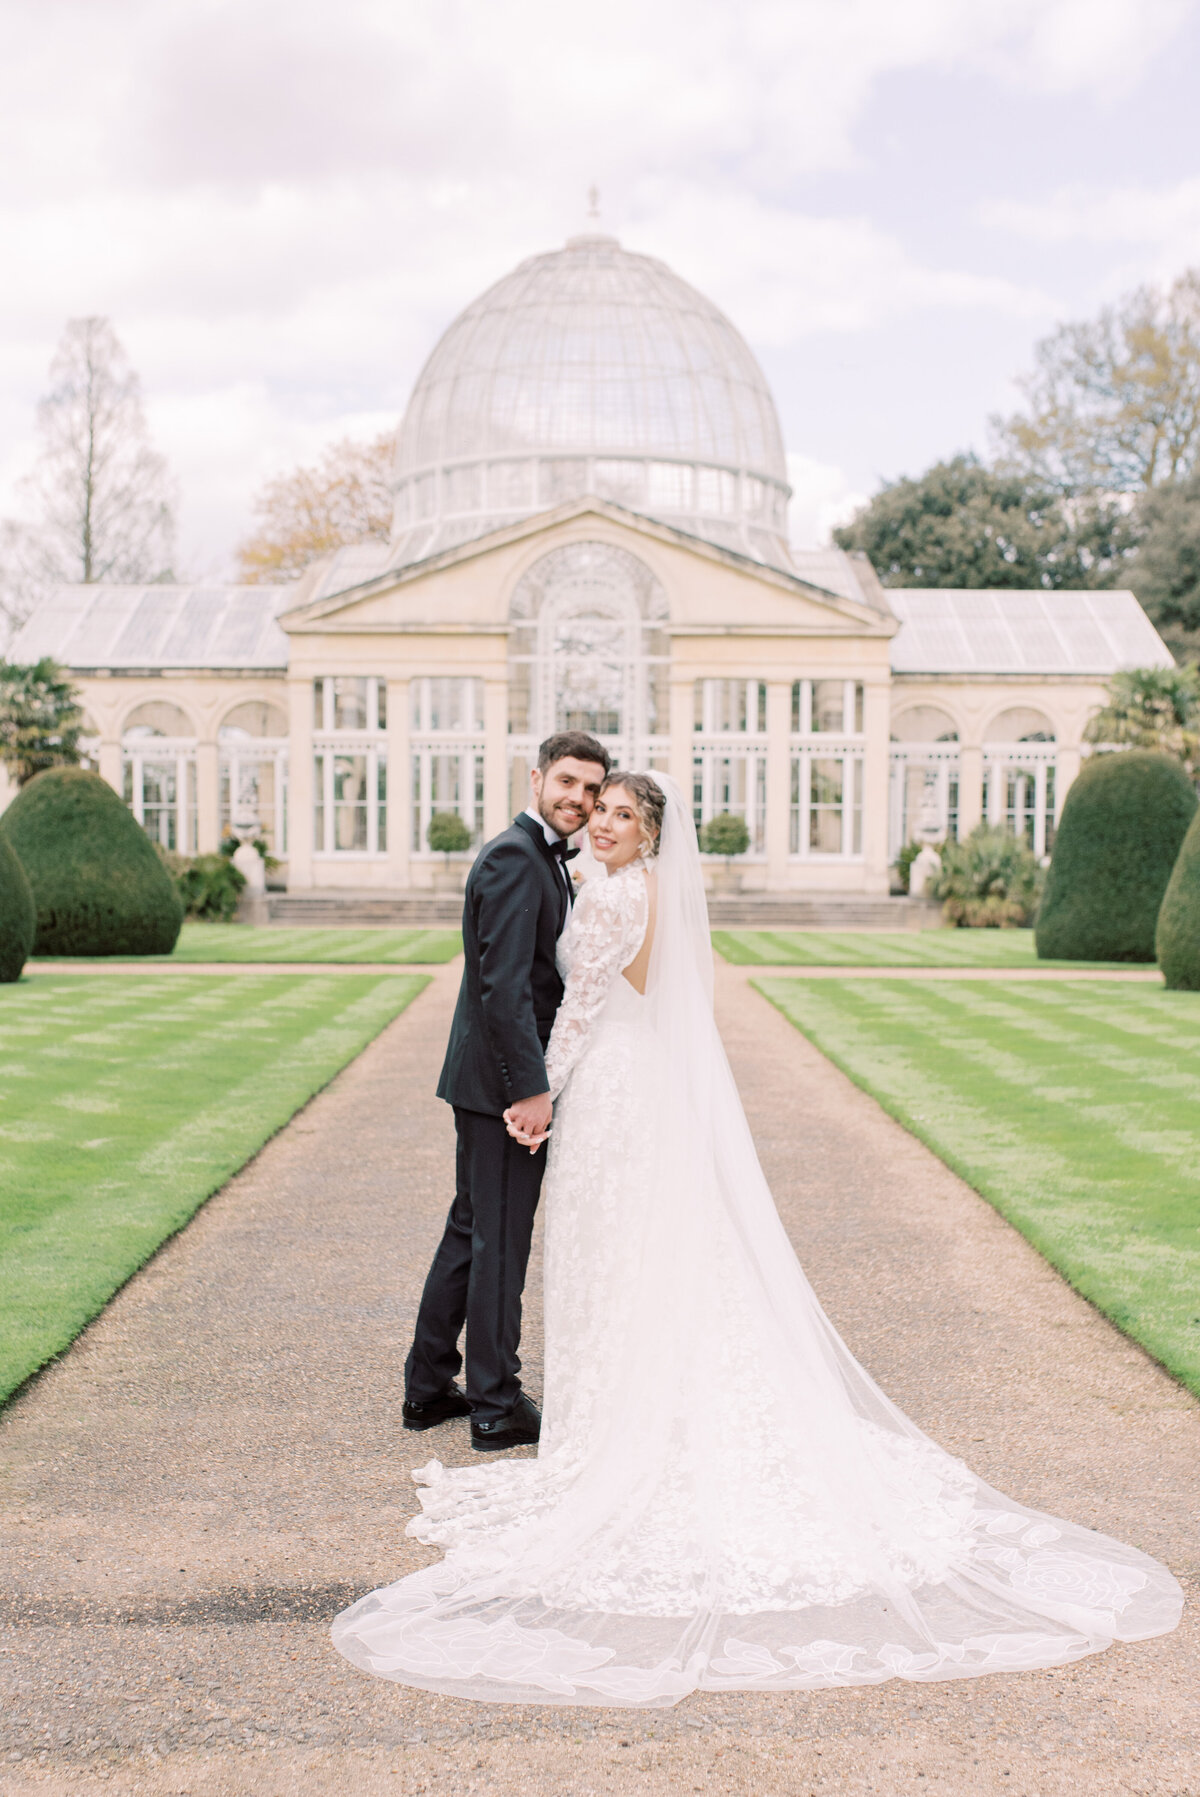 Bride and groom are standing side by side looking back at the camera, while holding hands, Syon Park is in the back ground of the image. The bride is wearing a white lace dress and veil and the groom is in a black tux